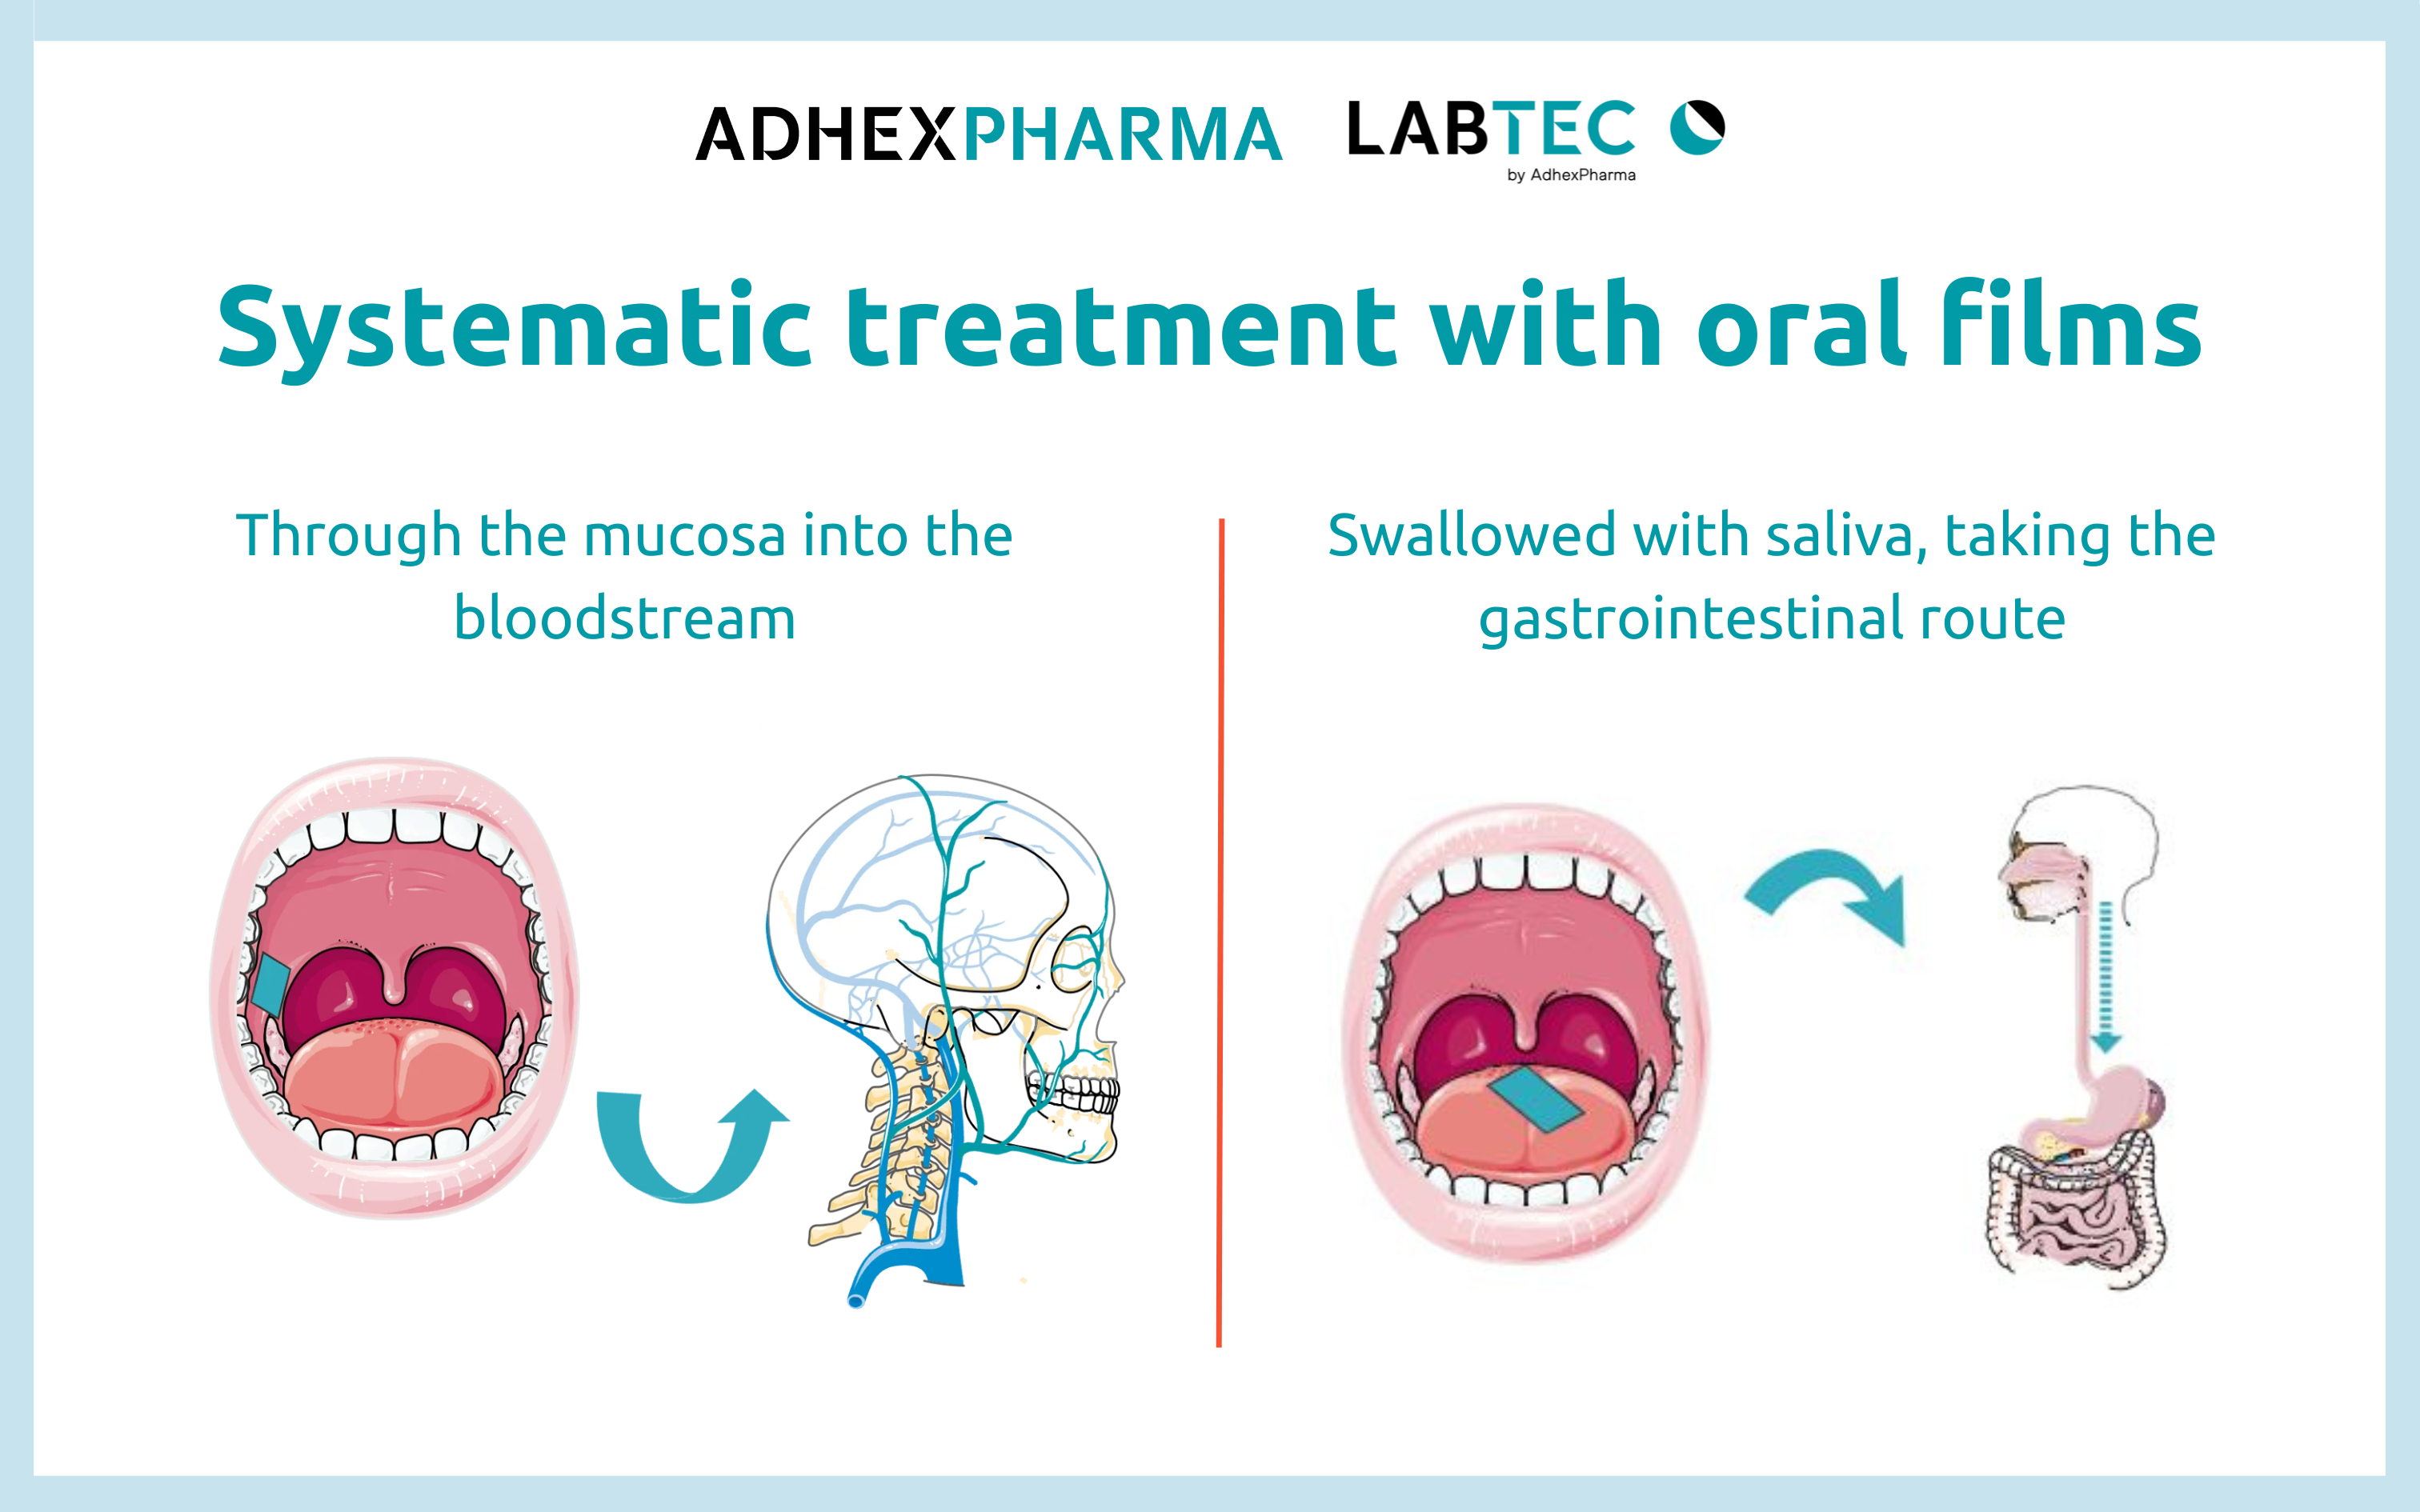 Systematic treatment with oral films